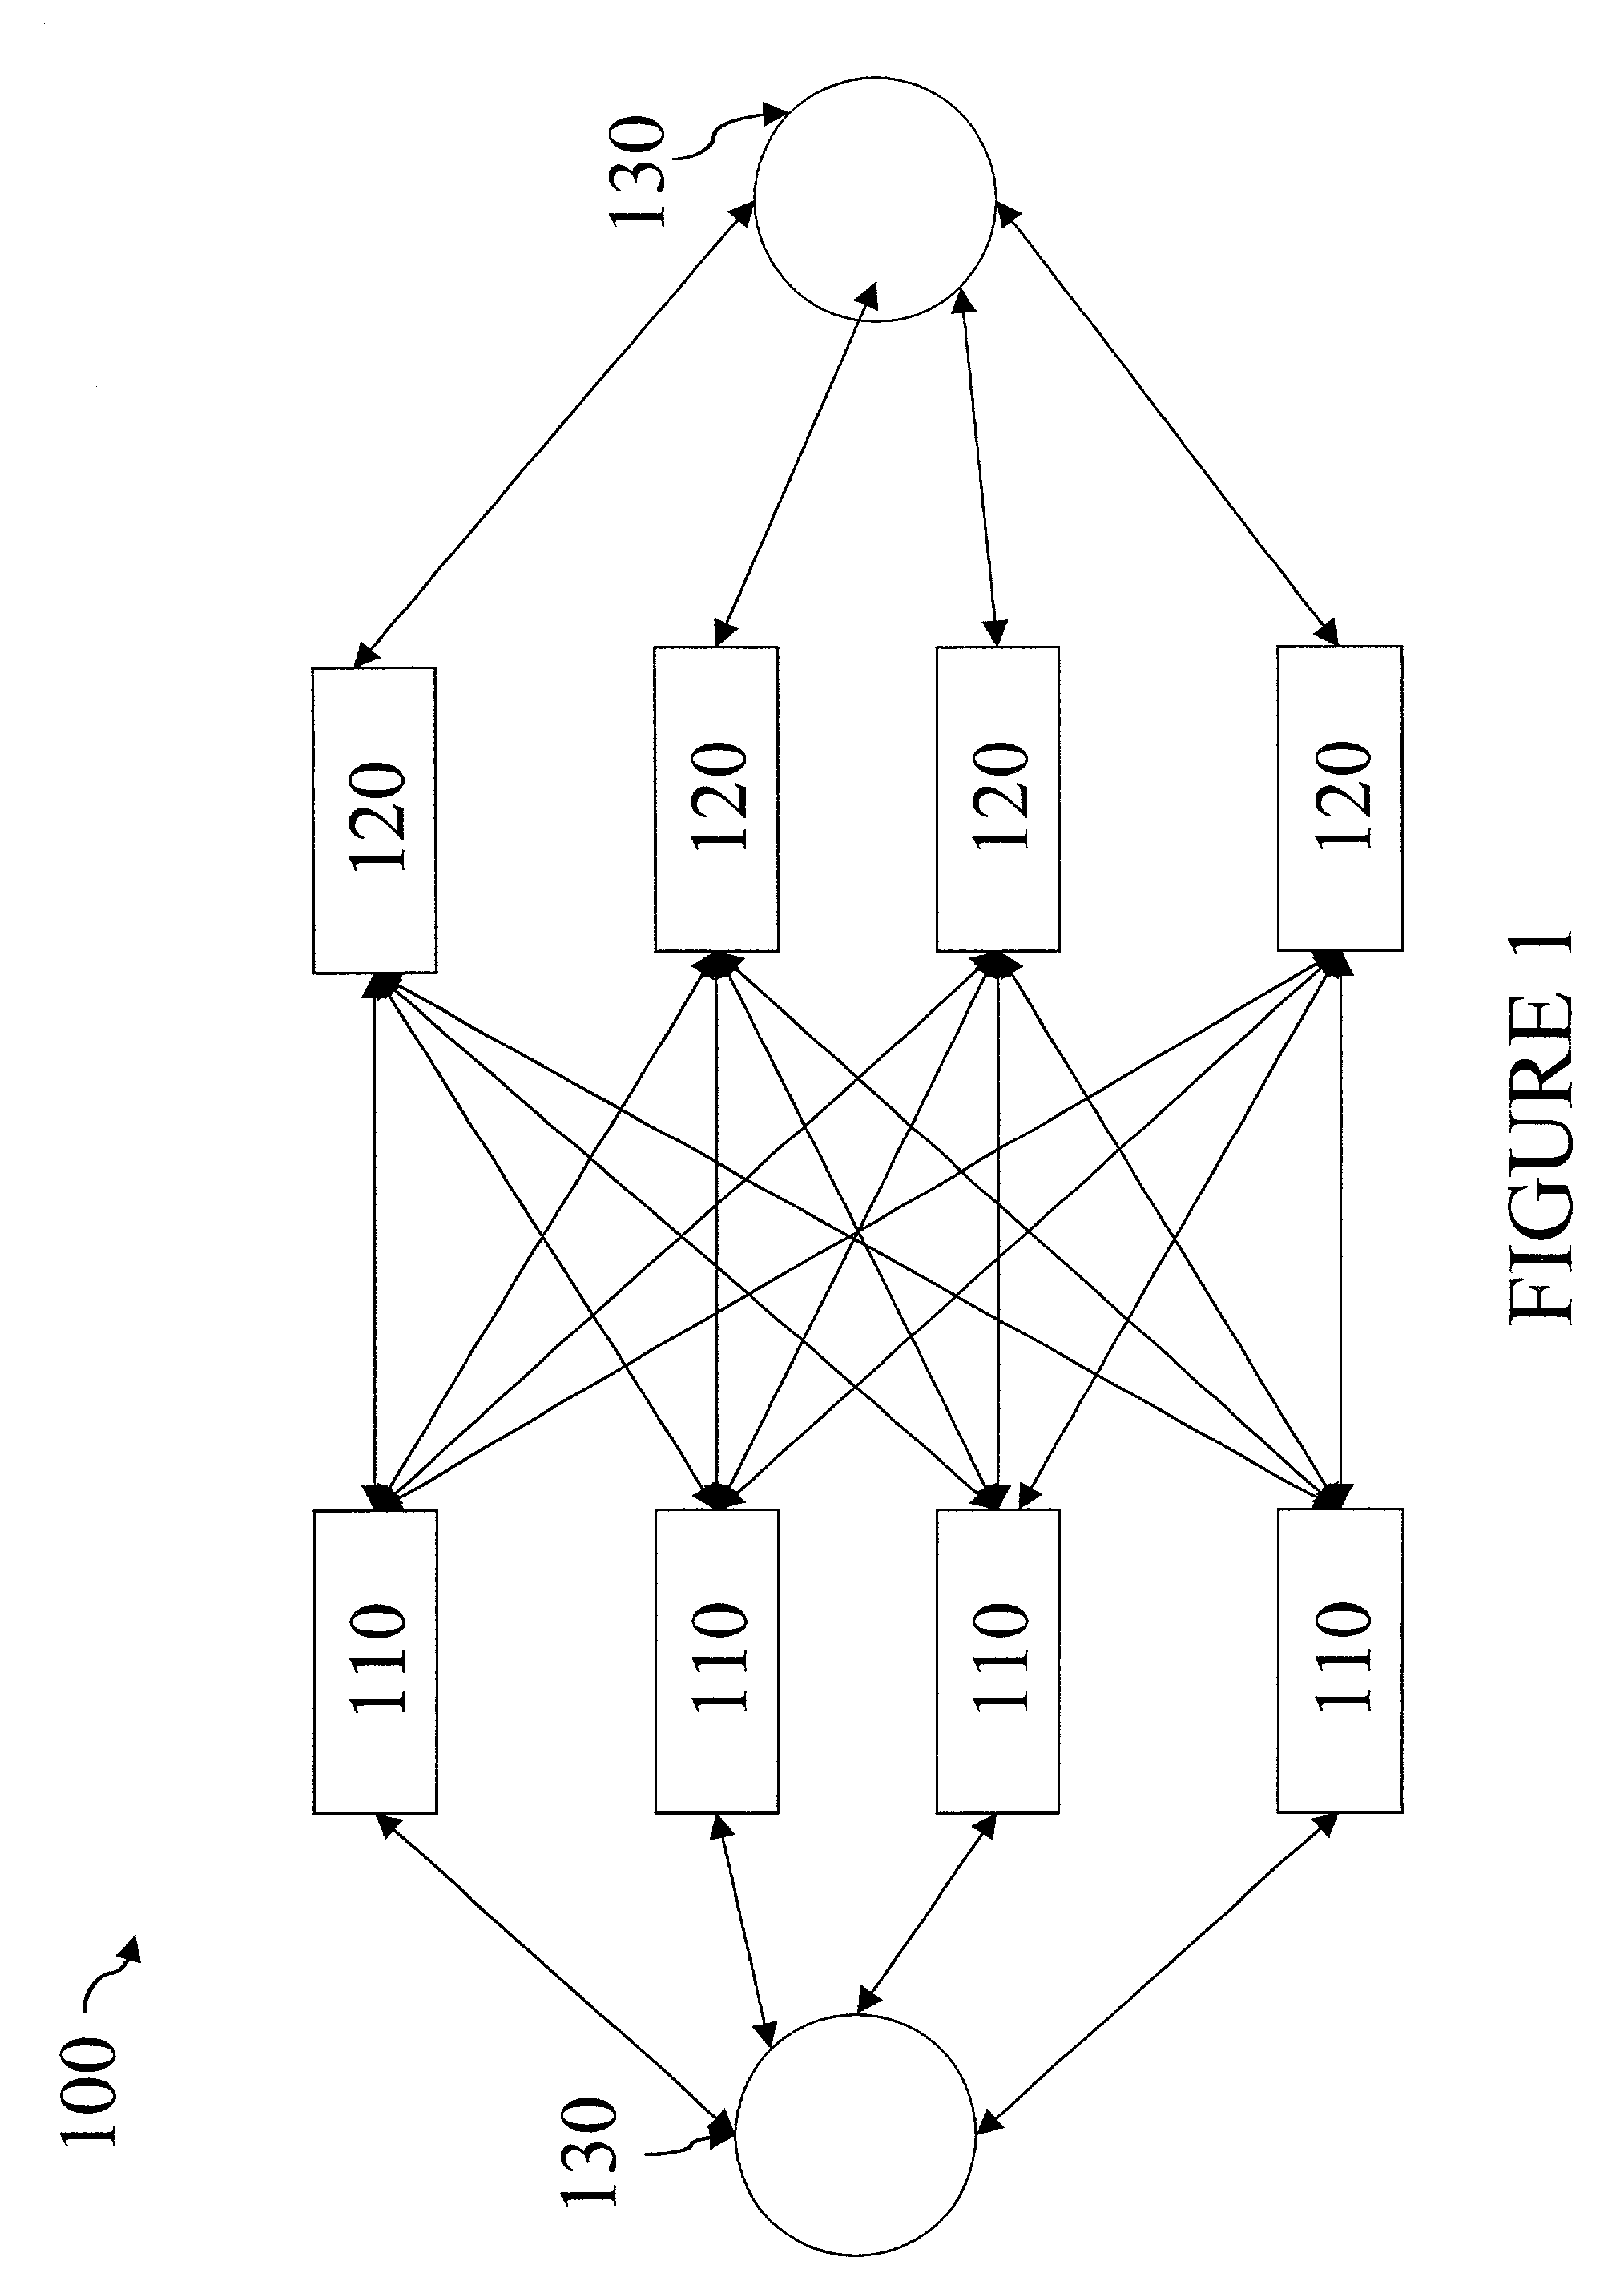 Backoff protocols and methods for distributed mutual exclusion and ordering